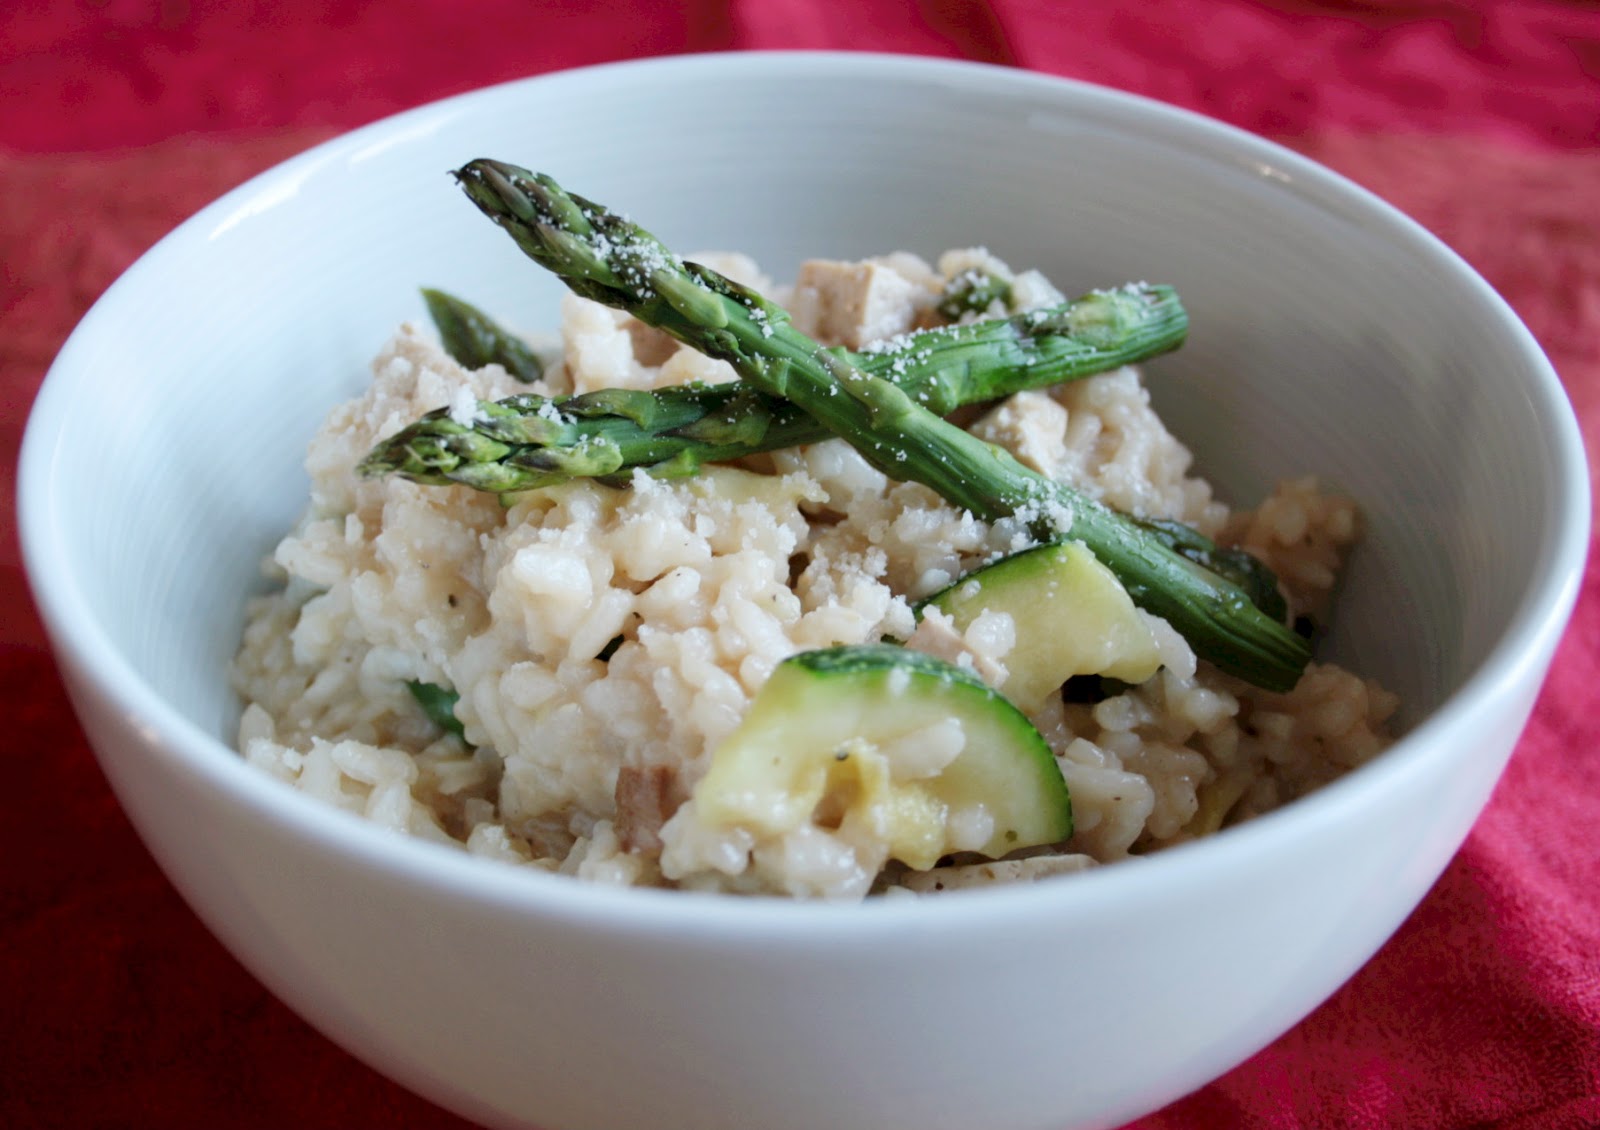 Asparagus courgette and smoked tofu risotto is perfect comfort food that is still healthy!